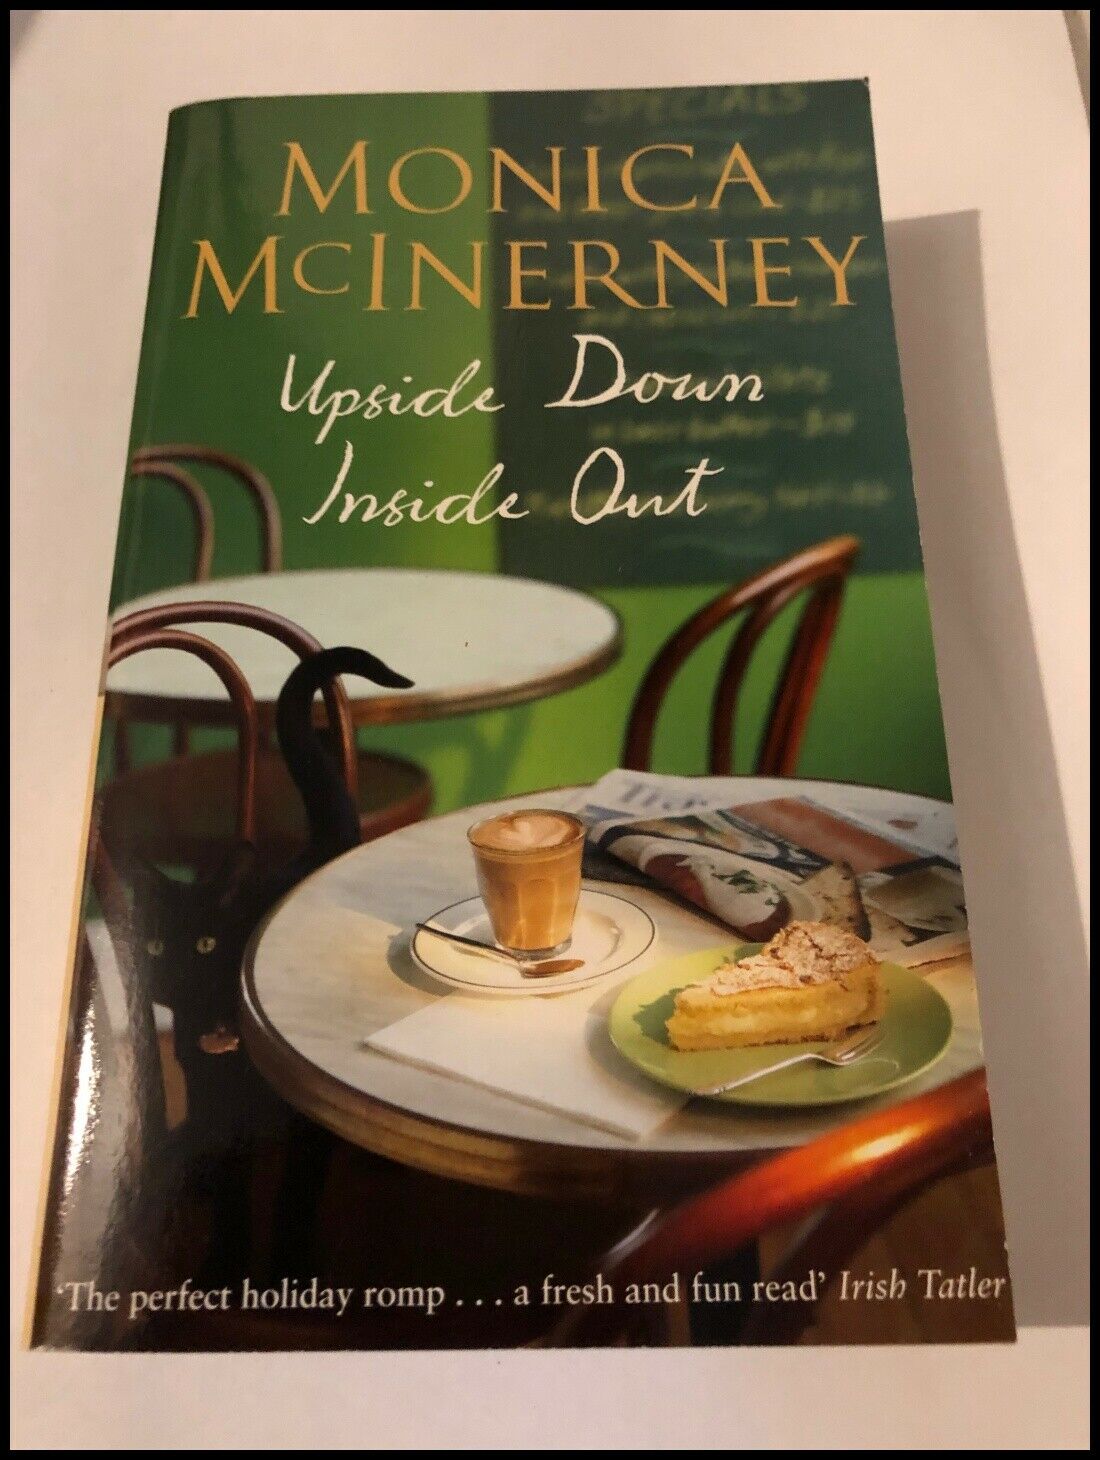 Upside Down Inside Out by Monica McInerney (Paperback 2002)